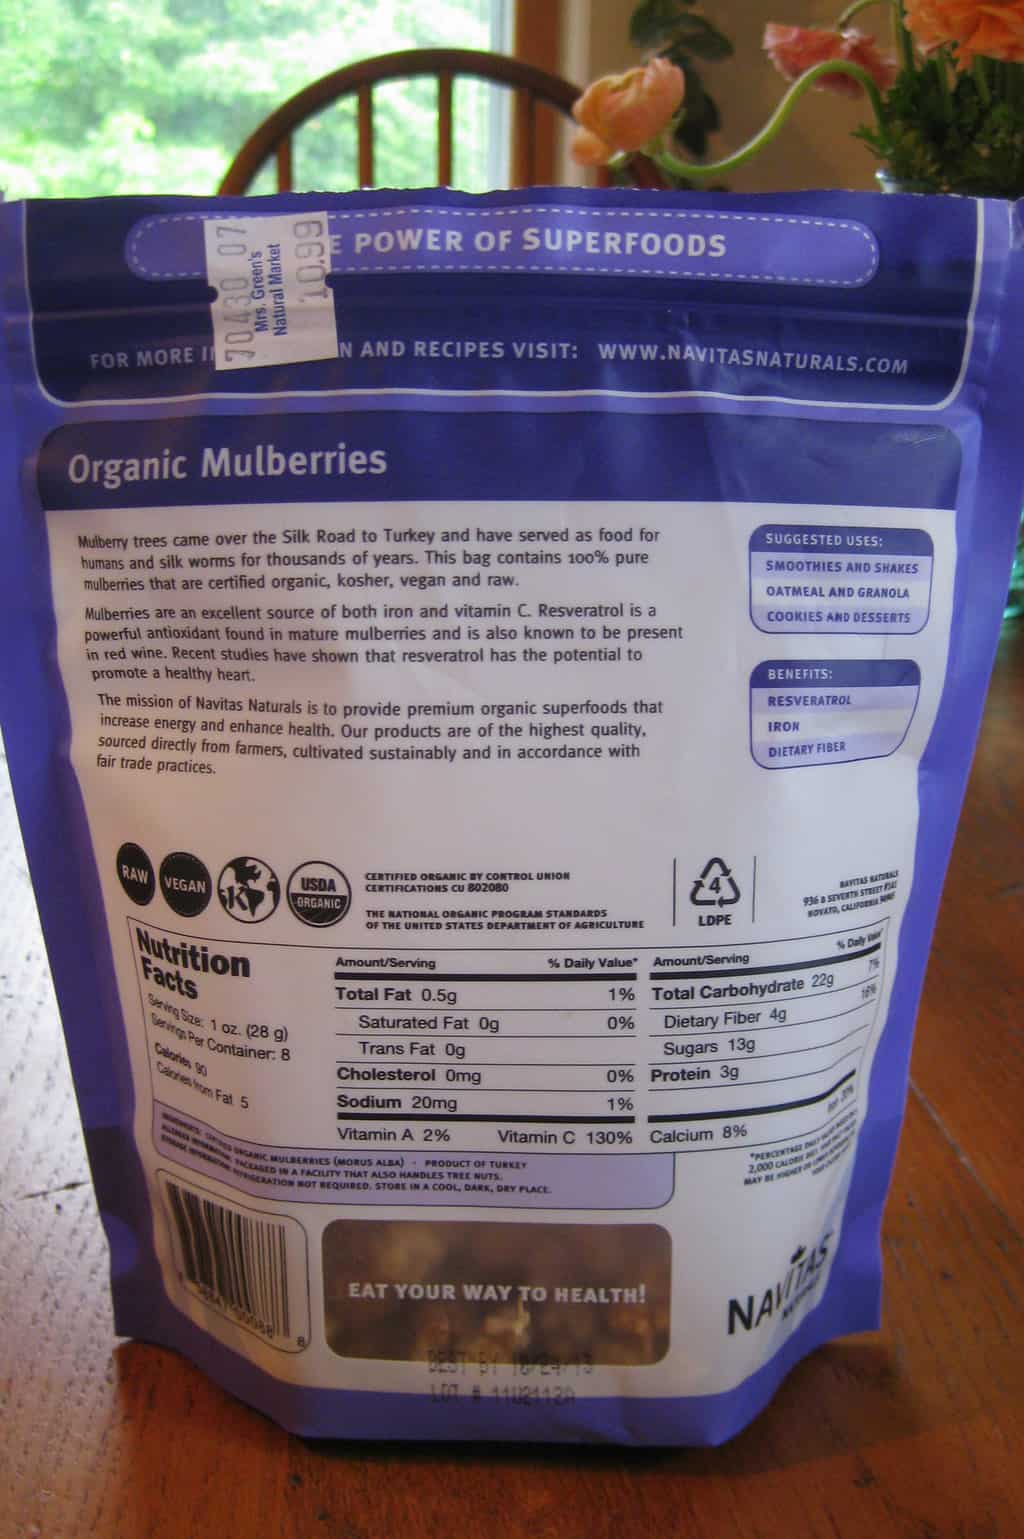 My New Favorite Superfood Snack: Dried Organic Mulberries